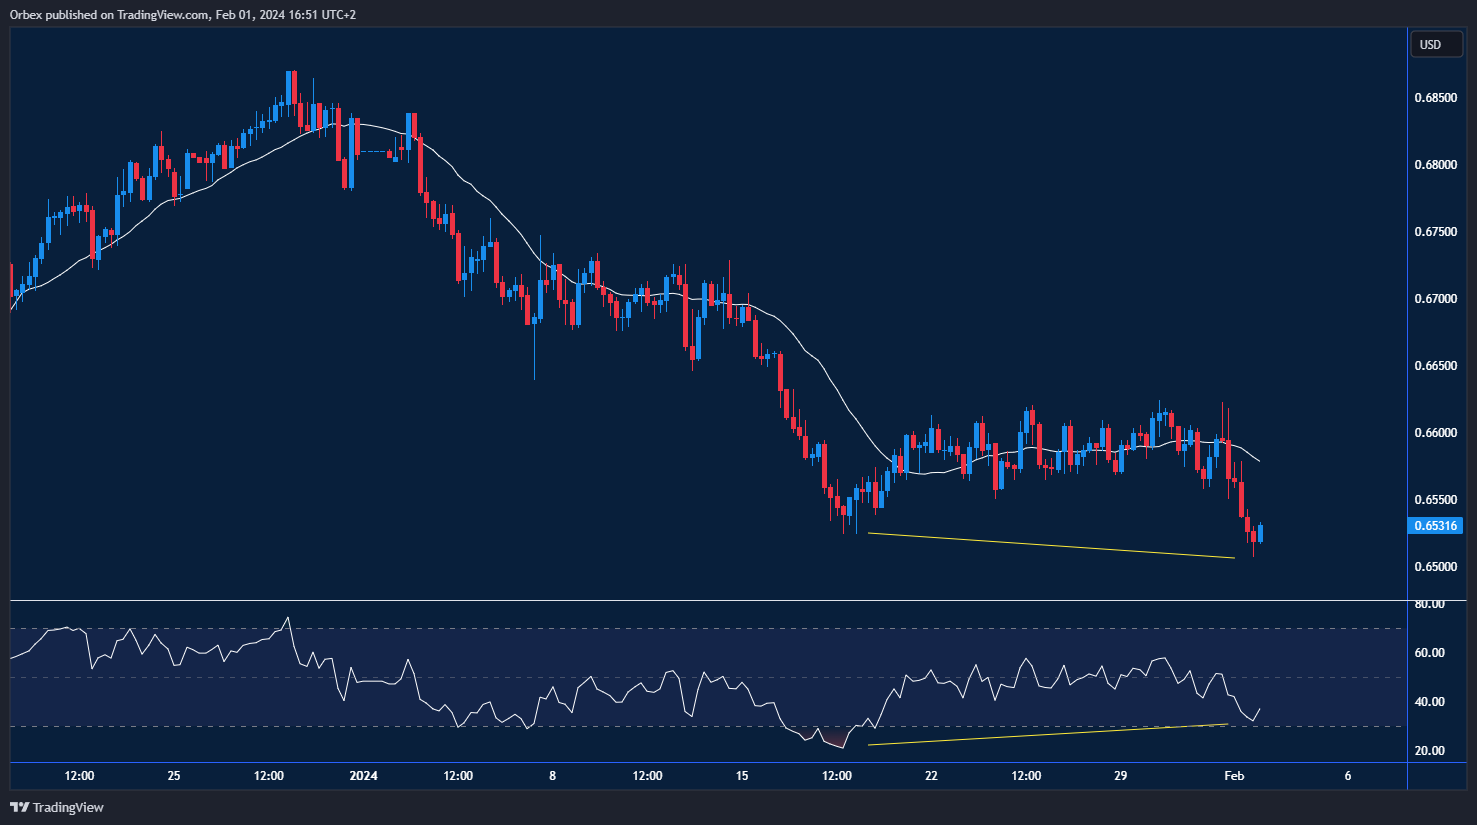 Graph showing the potential rebound and movement of the AUDUSD currency pair.